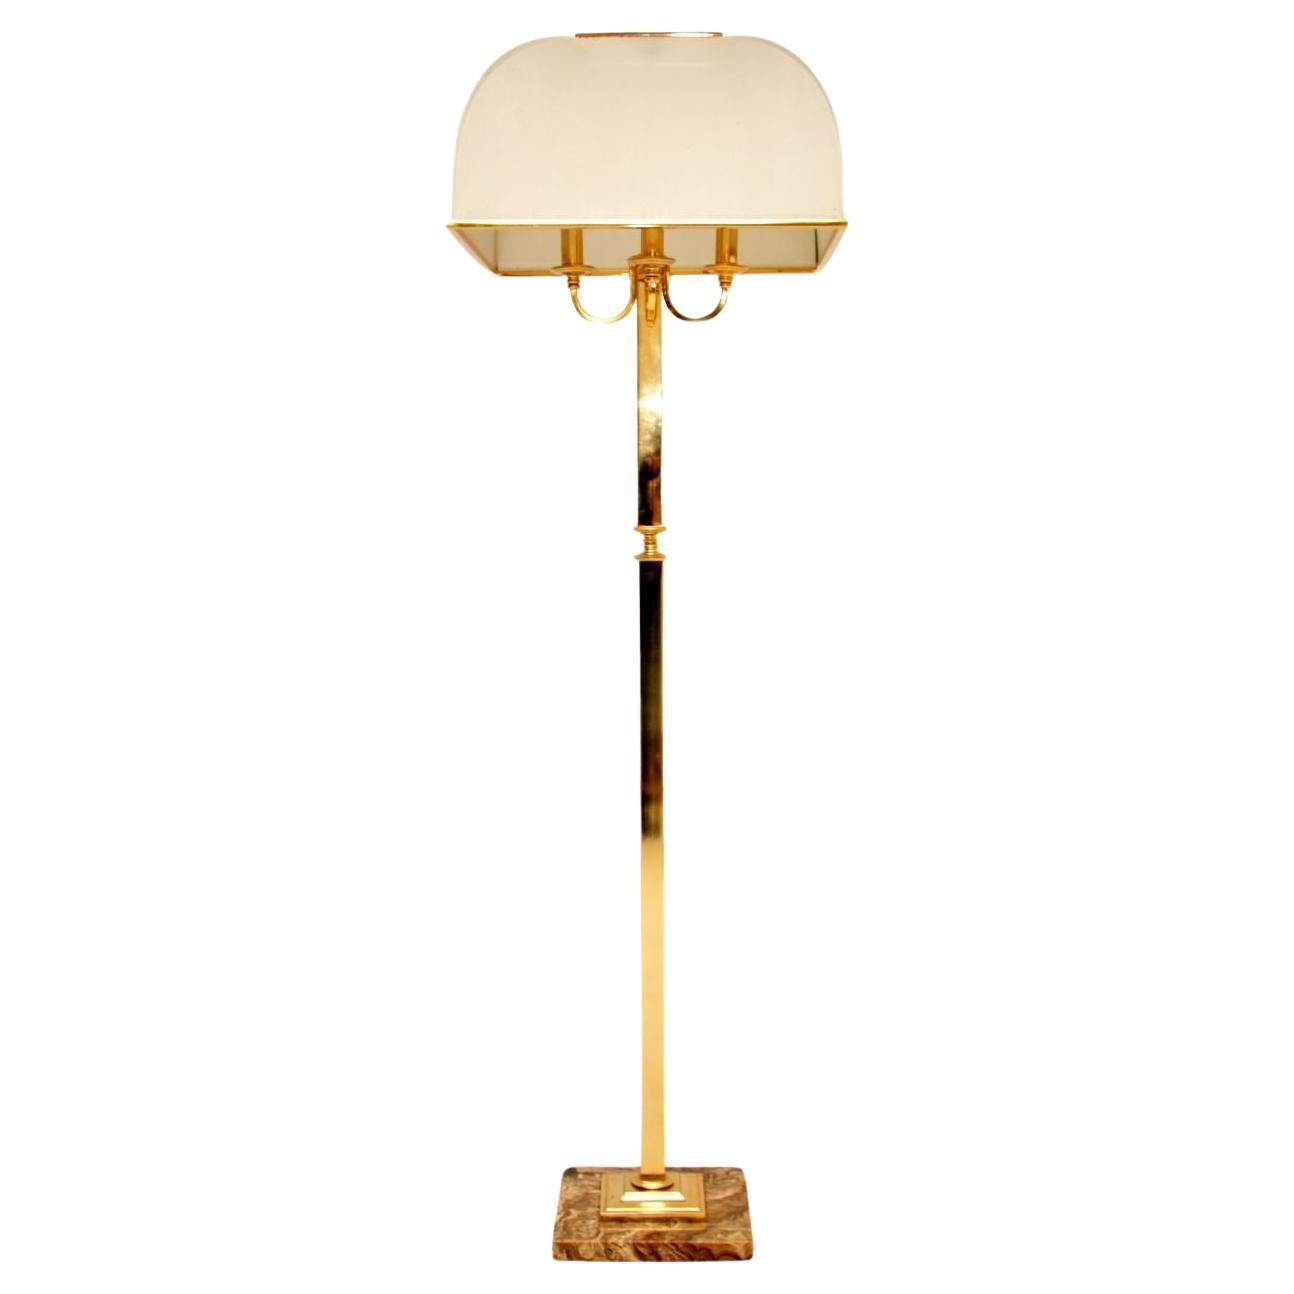 Vintage Brass and Marble Floor Lamp